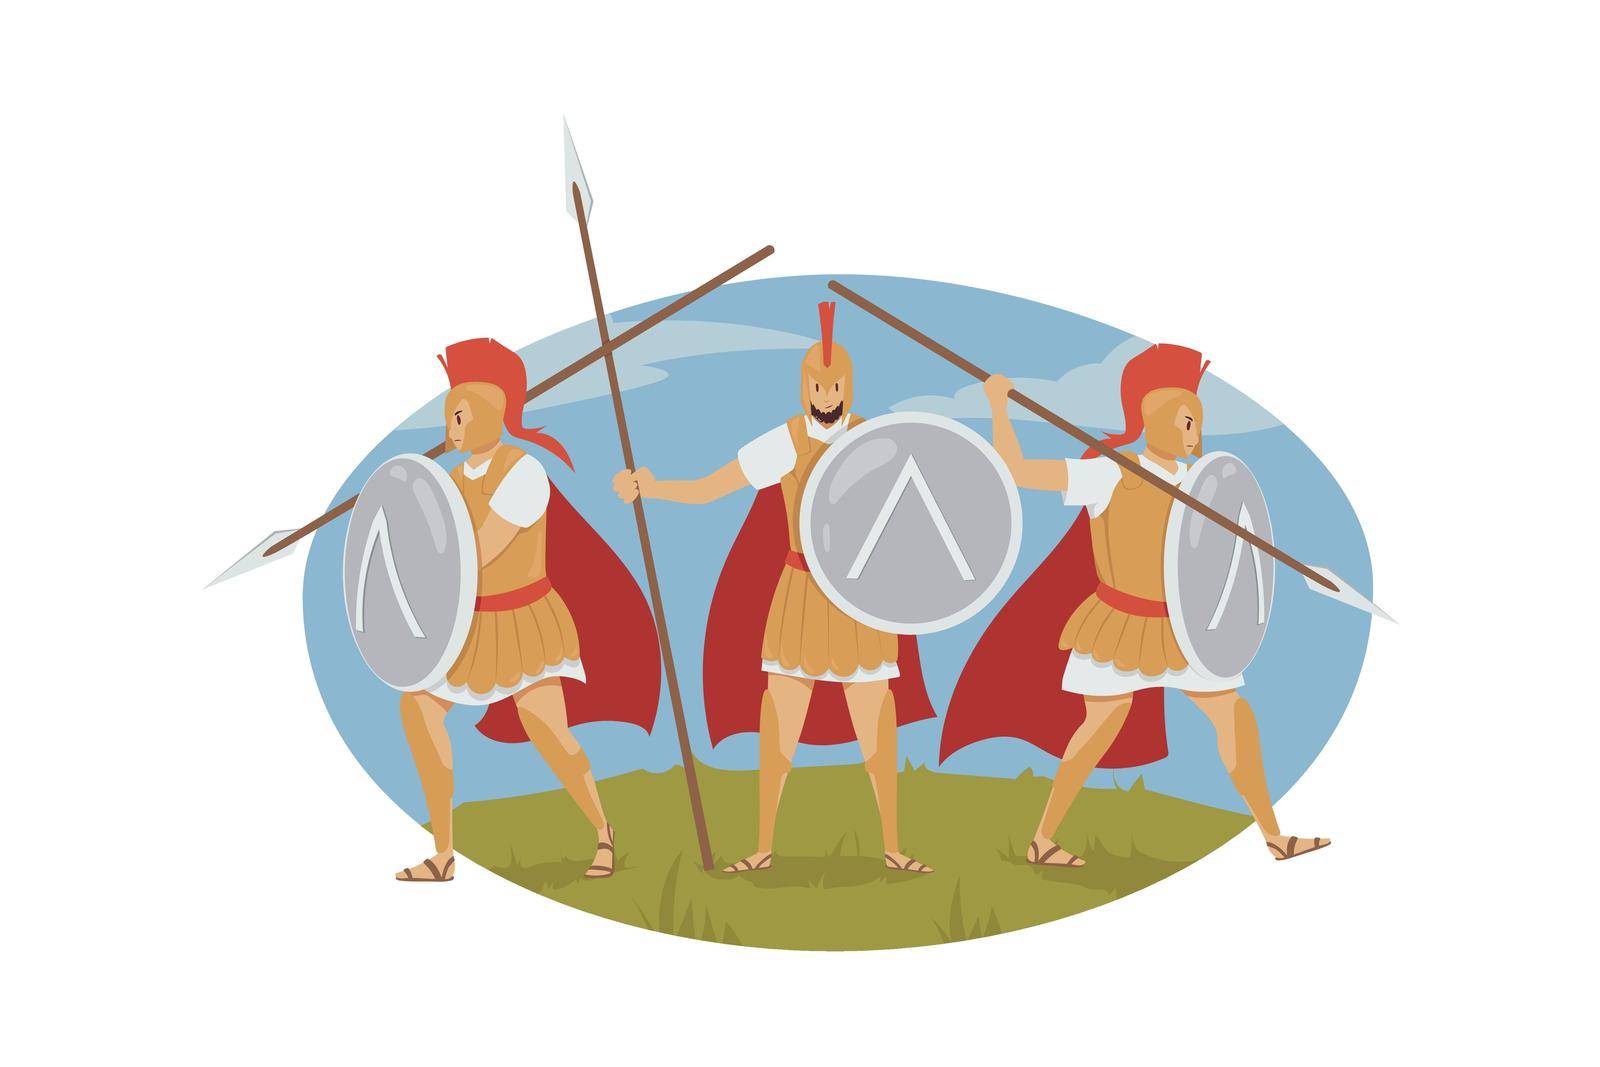 Mythology, Greece, war, Sparta, history concept. Ancient Greek historical event illustration. Group of famous three hundred Spartans warriors characters getting ready for famous Battle of Thermopylae.